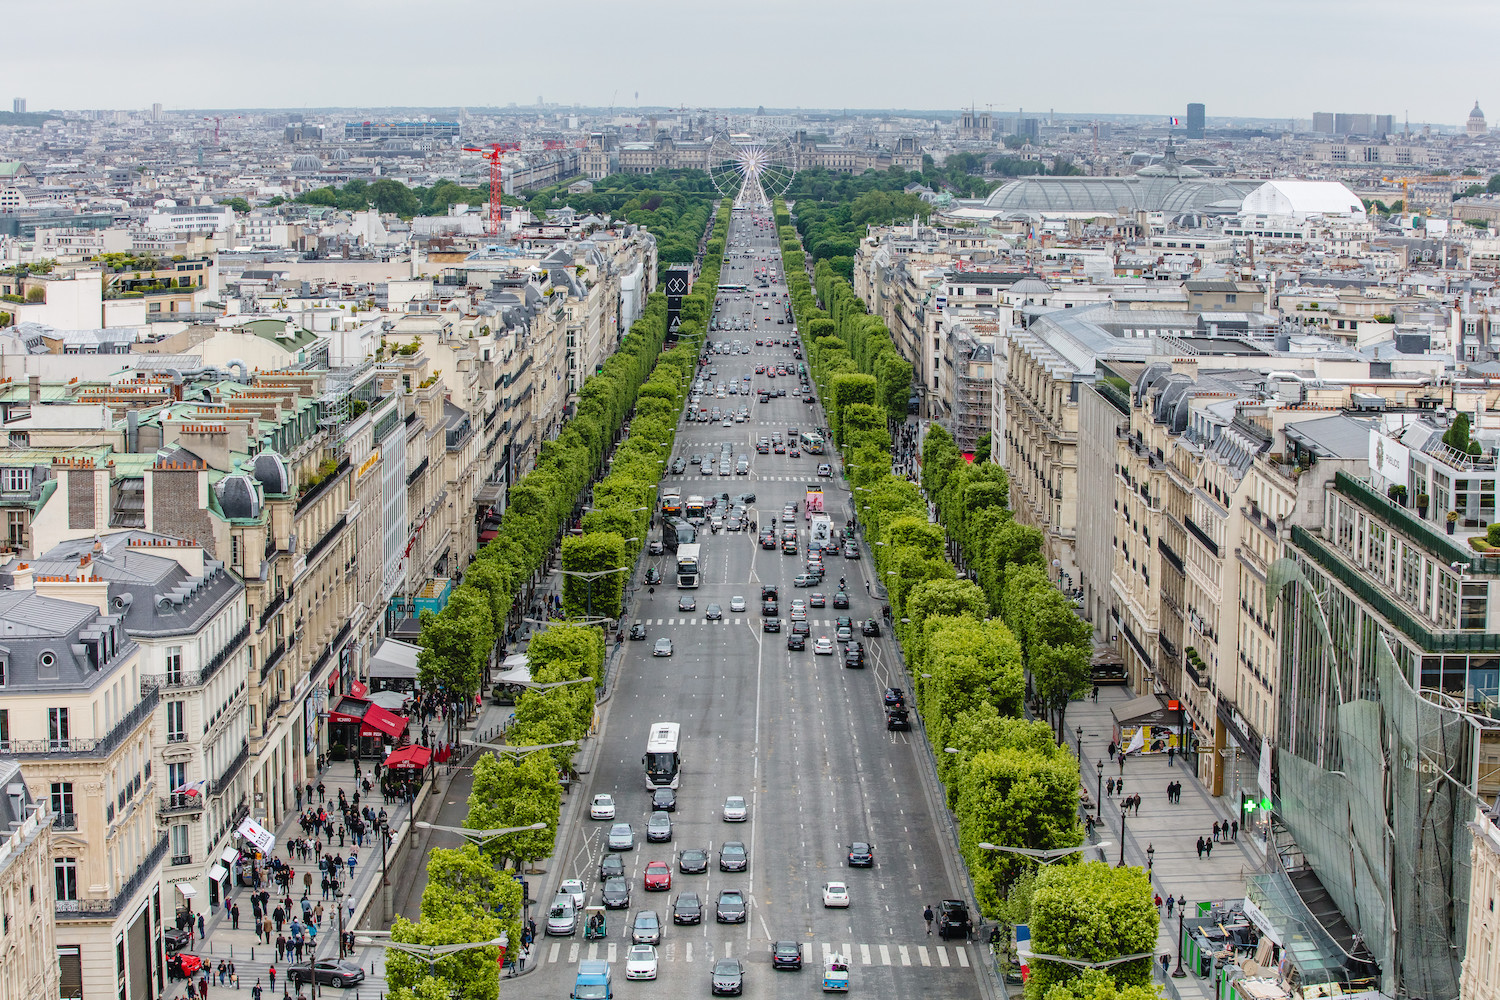 Paris to ban traffic from city center in 2022